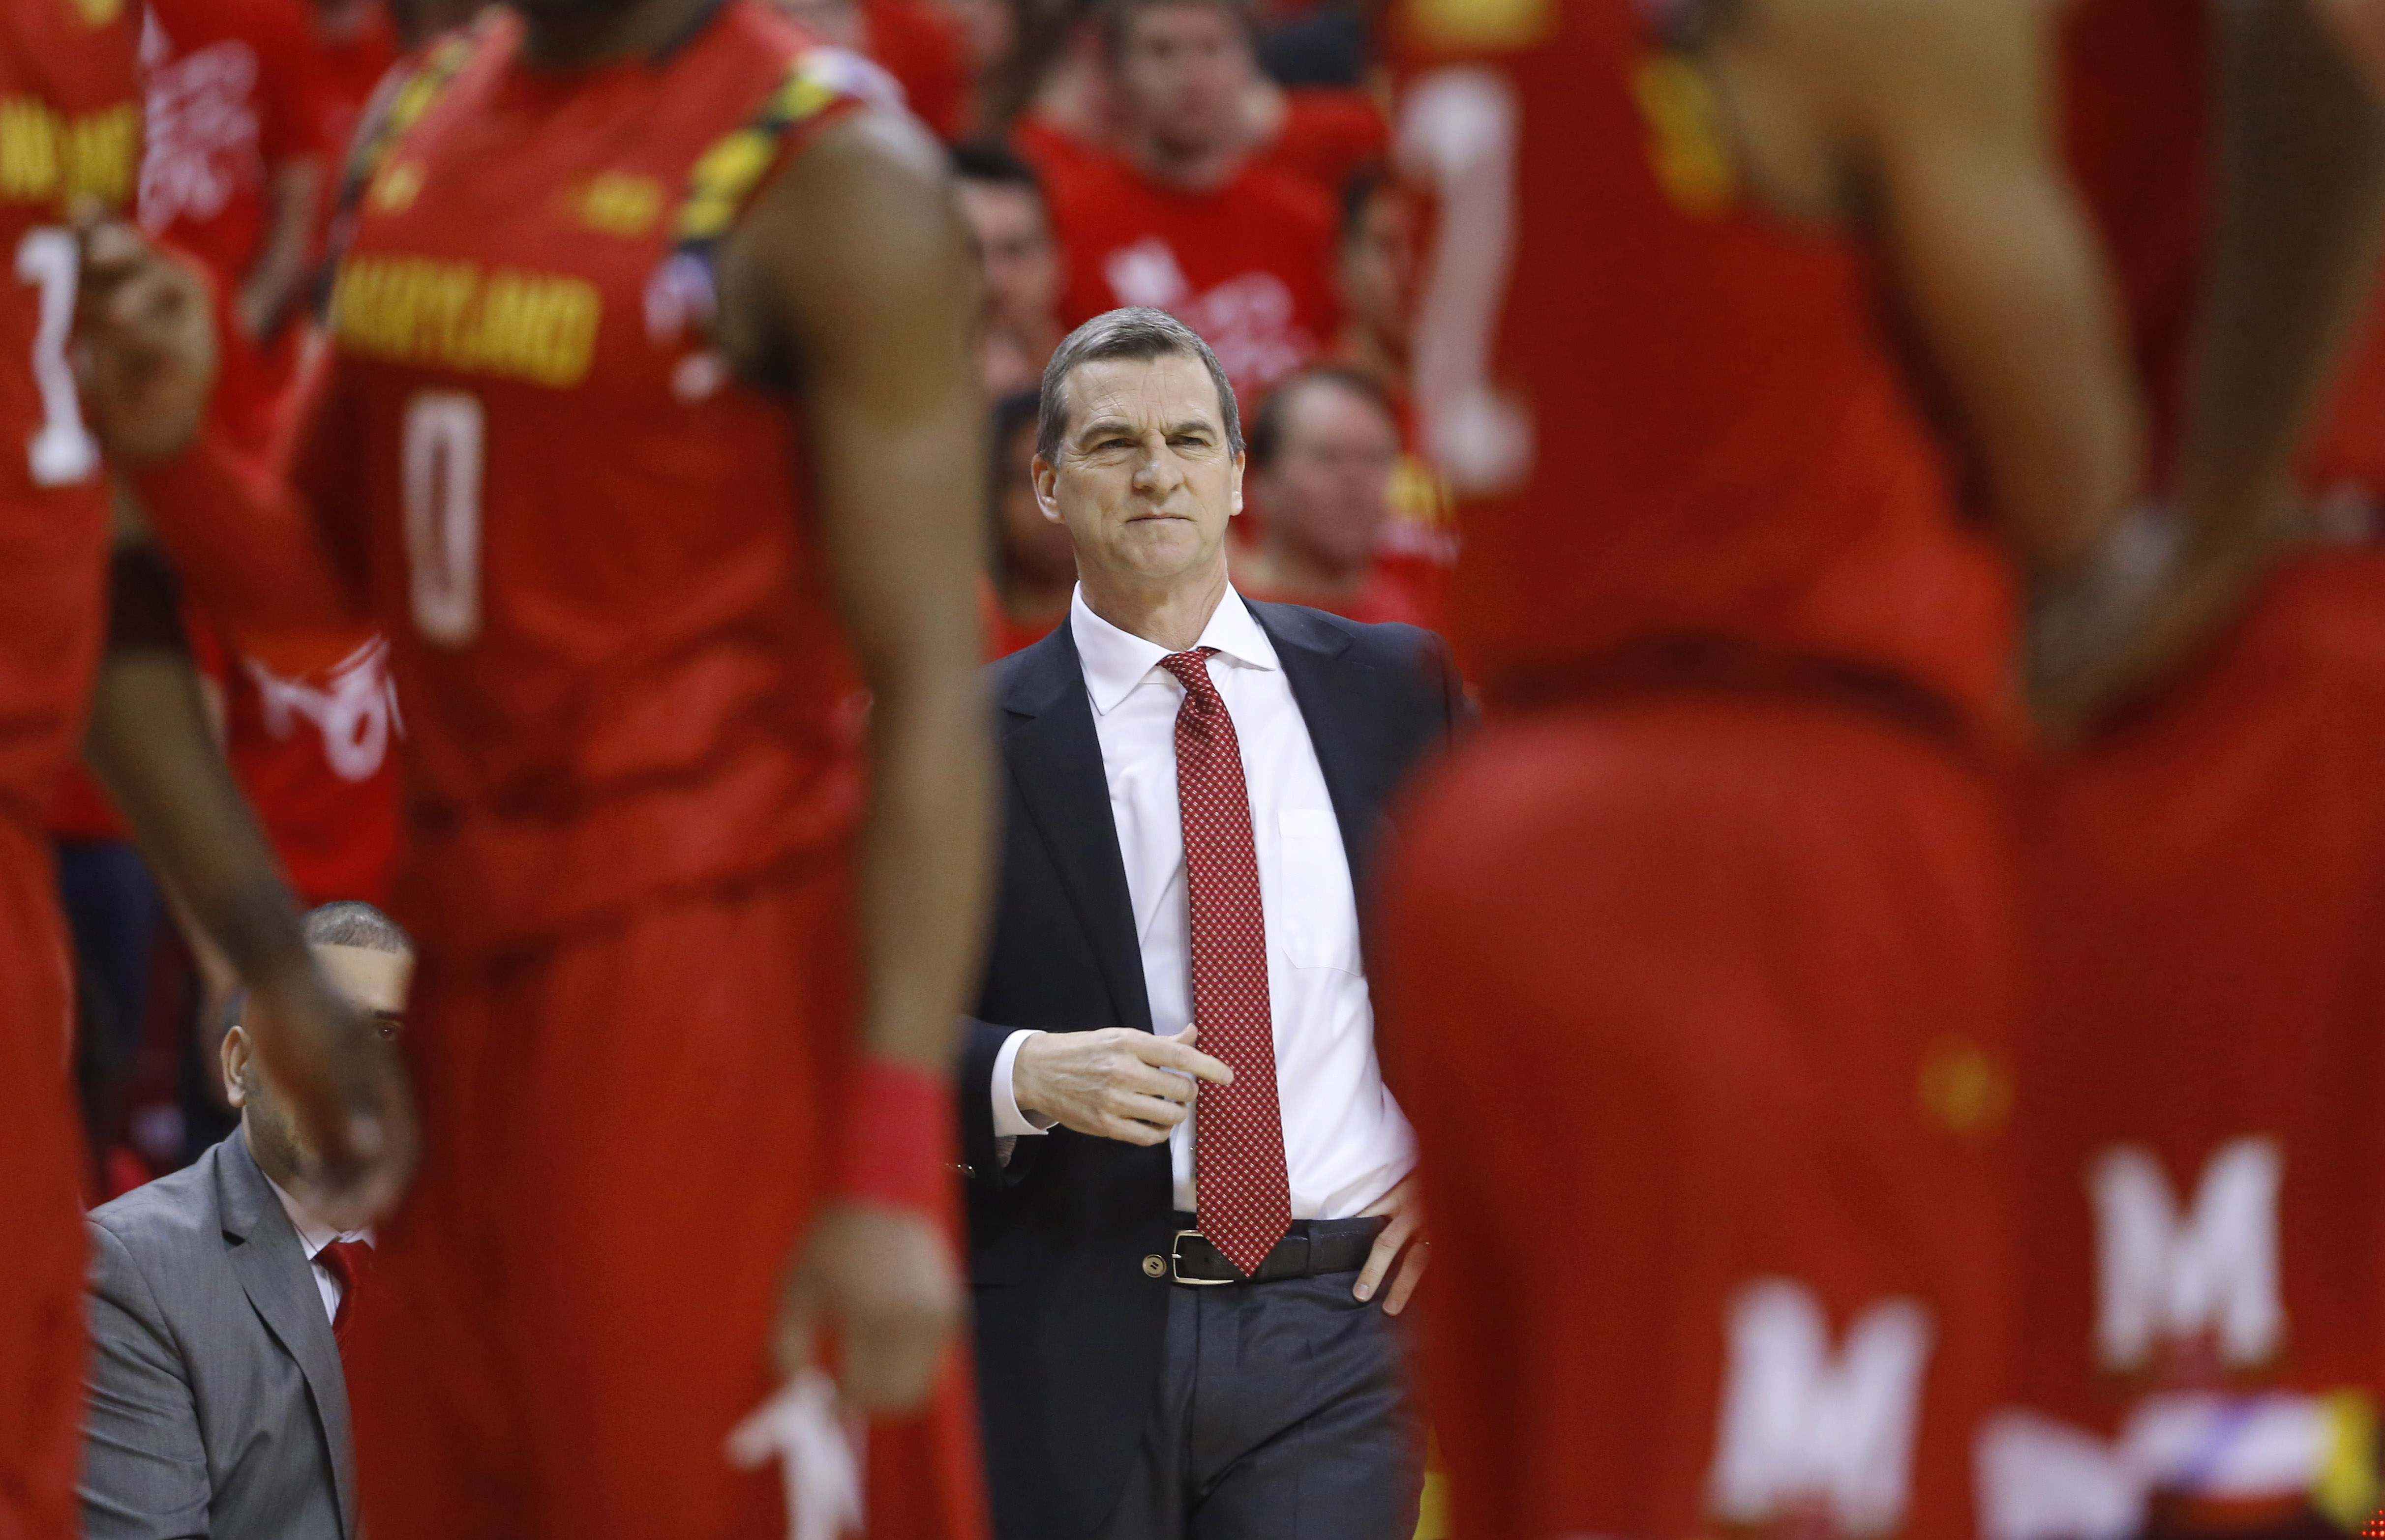 Maryland head coach Mark Turgeon watches from the sideline during a break in play in the first half of an NCAA college basketball game against Purdue, Saturday, Feb. 6, 2016, in College Park, Md. (AP Photo/Patrick Semansky)